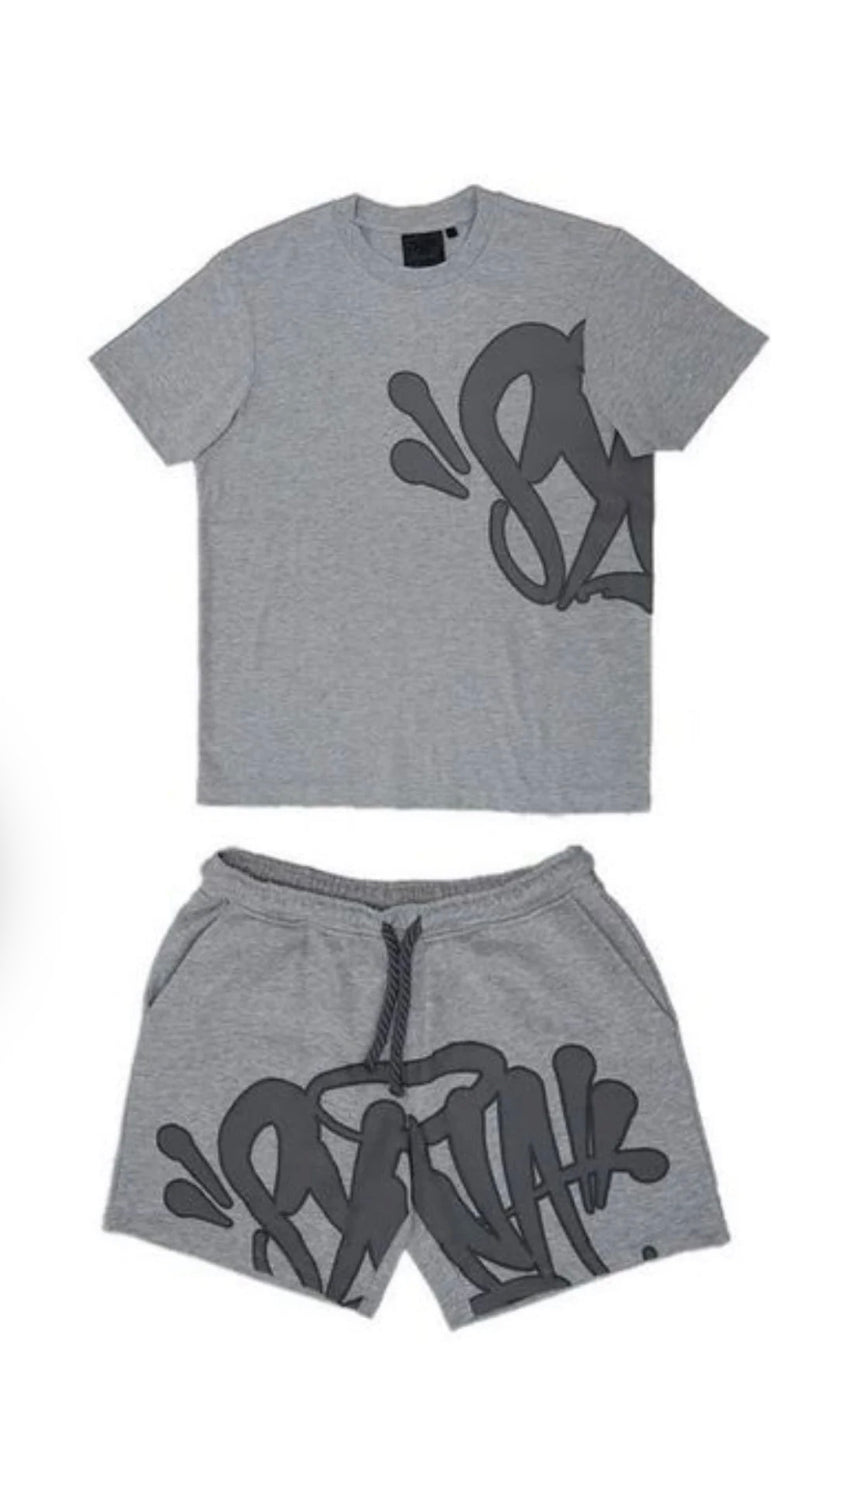 SYNA World, T-Shirt and Shorts Set in Grey